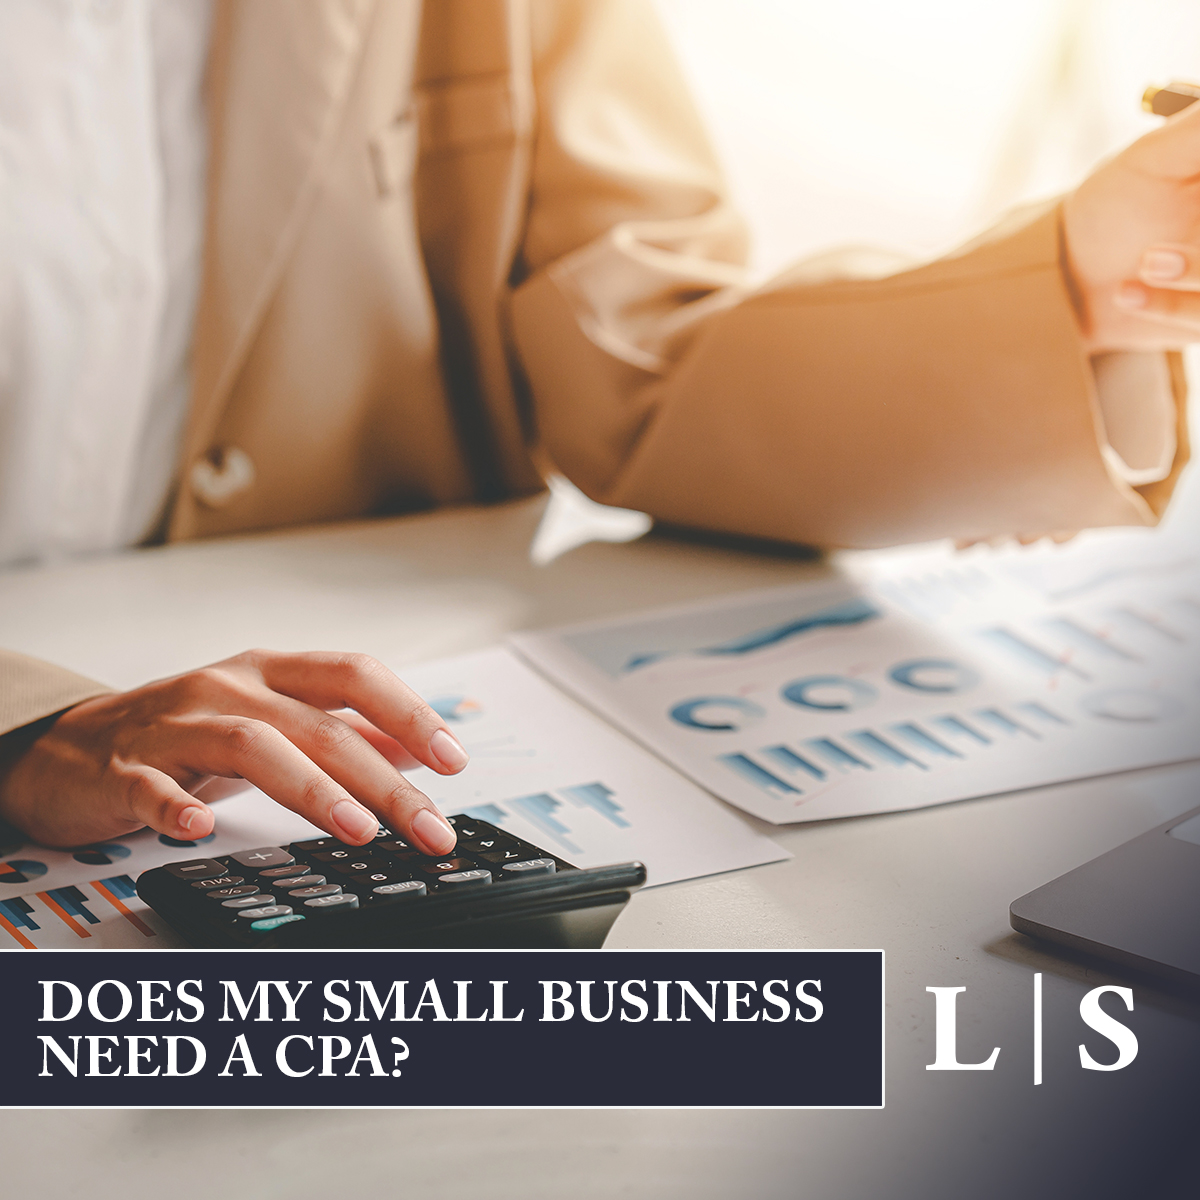 Does My Small Business Need a CPA?